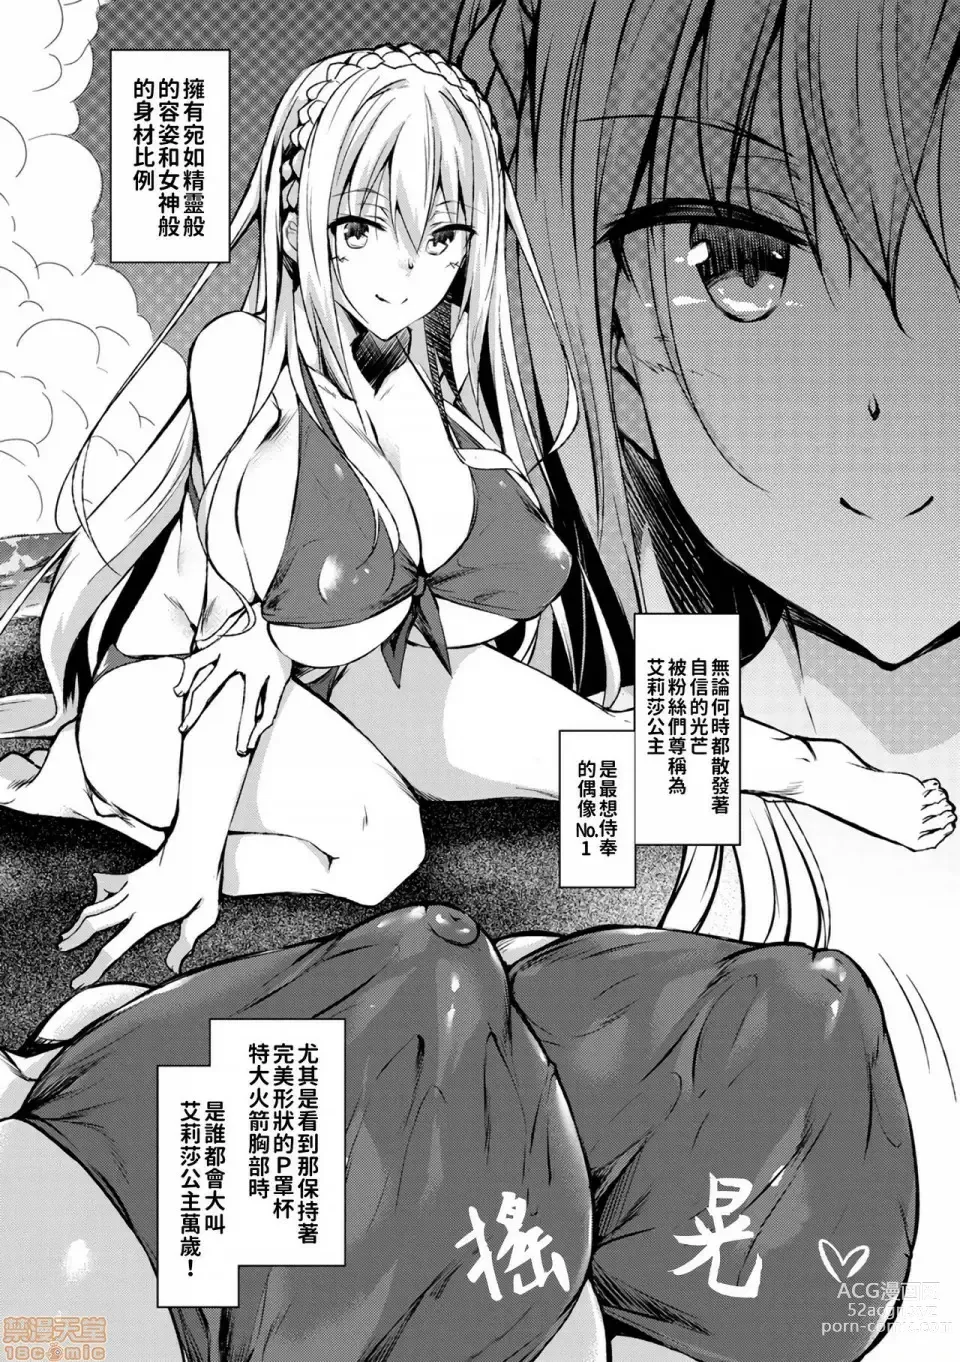 Page 6 of doujinshi Milk Mamire1+Special+FL+SideStory Full-Version